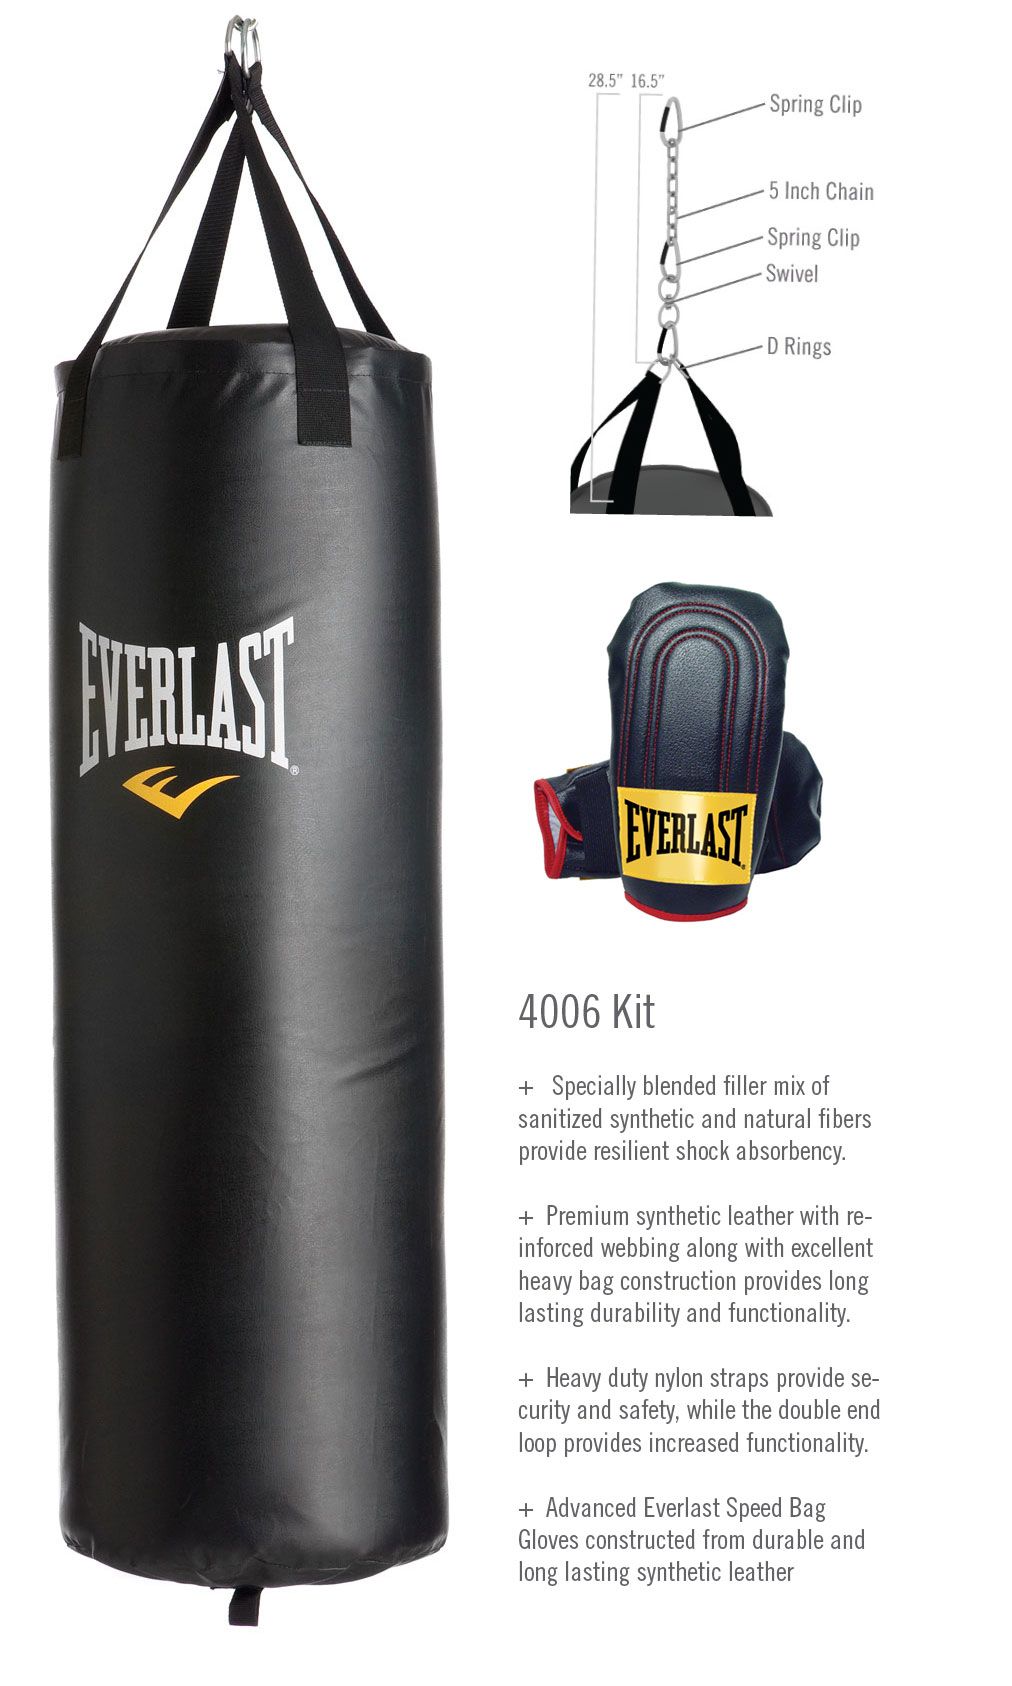 Everlast® 60 lb Heavy Bag Kit - Fitness & Sports - Extreme Sports - Boxing & Mixed Martial Arts ...